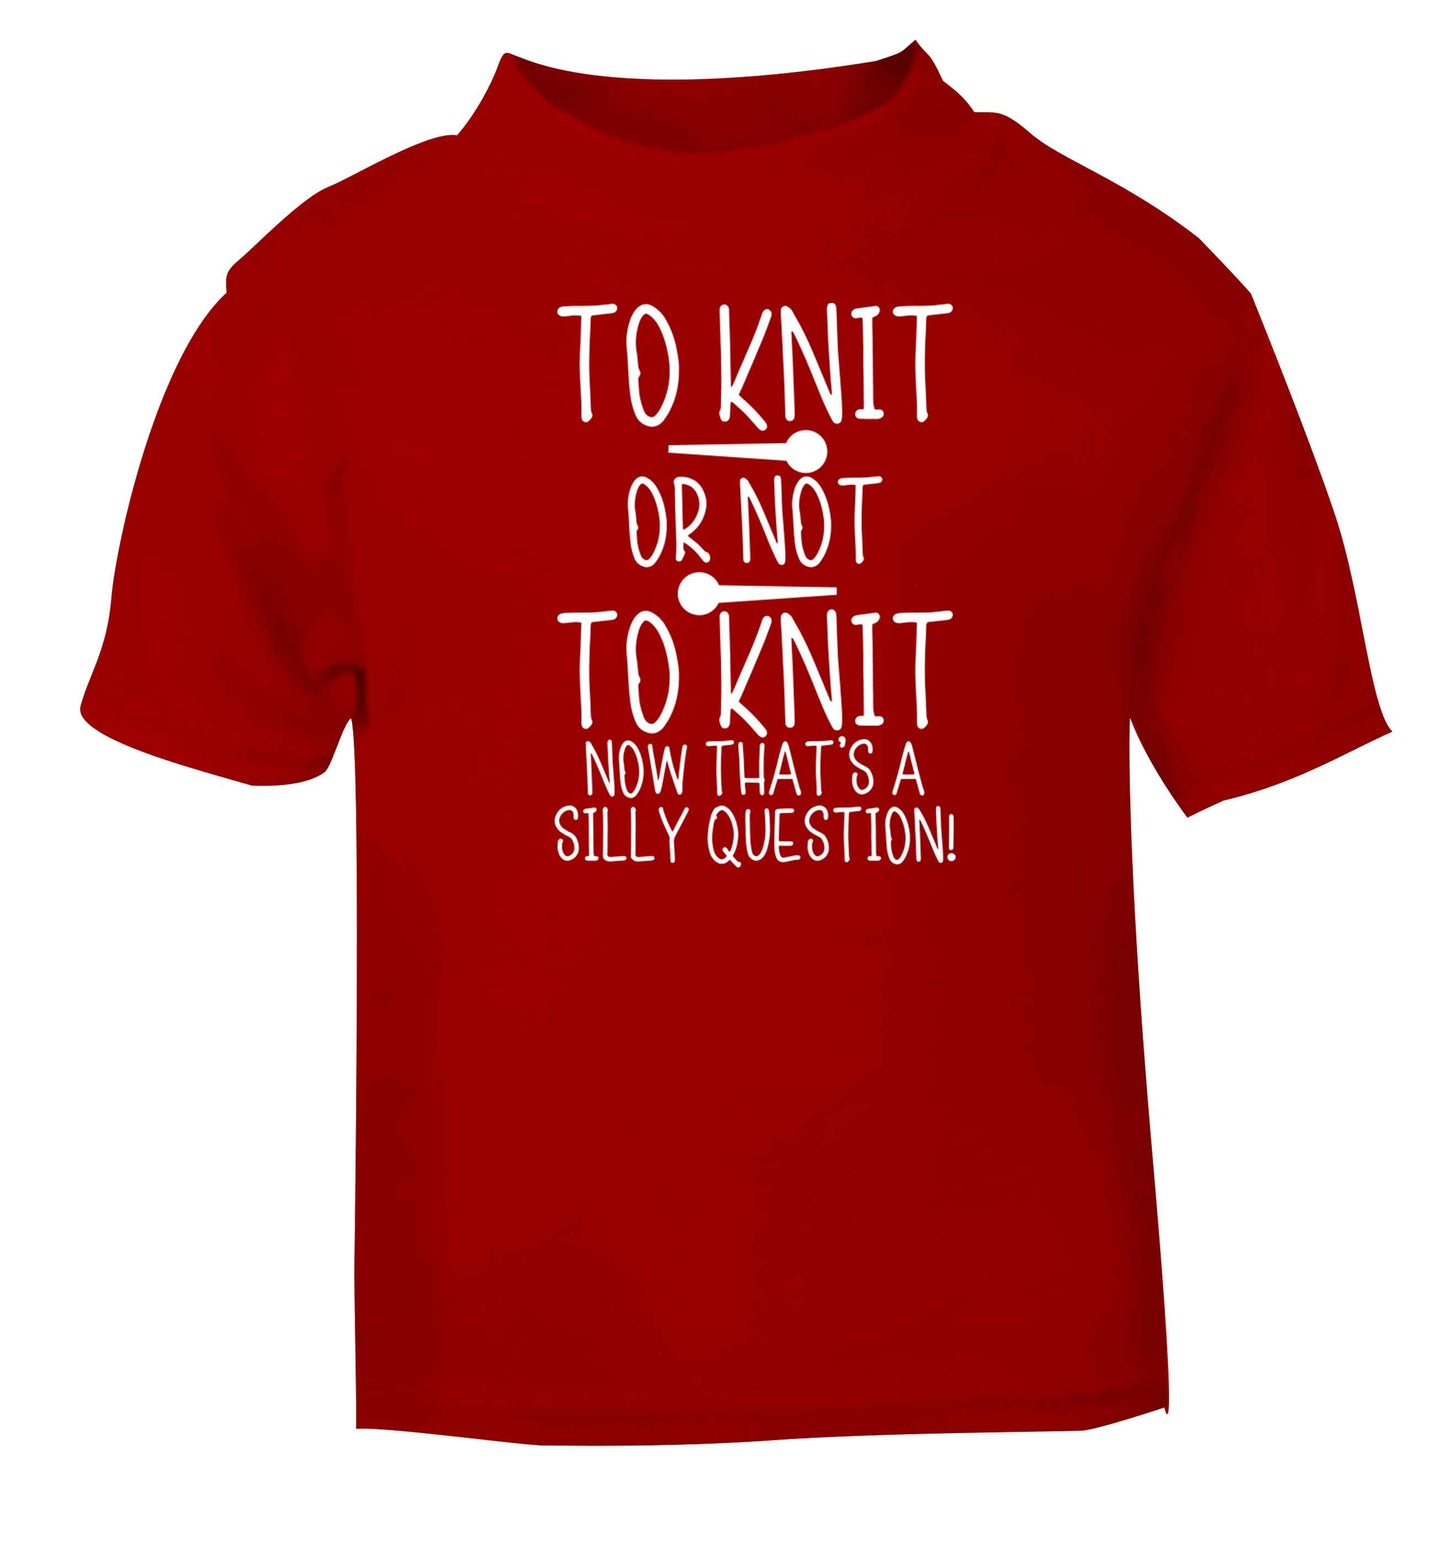 To knit or not to knit now that's a silly question red baby toddler Tshirt 2 Years